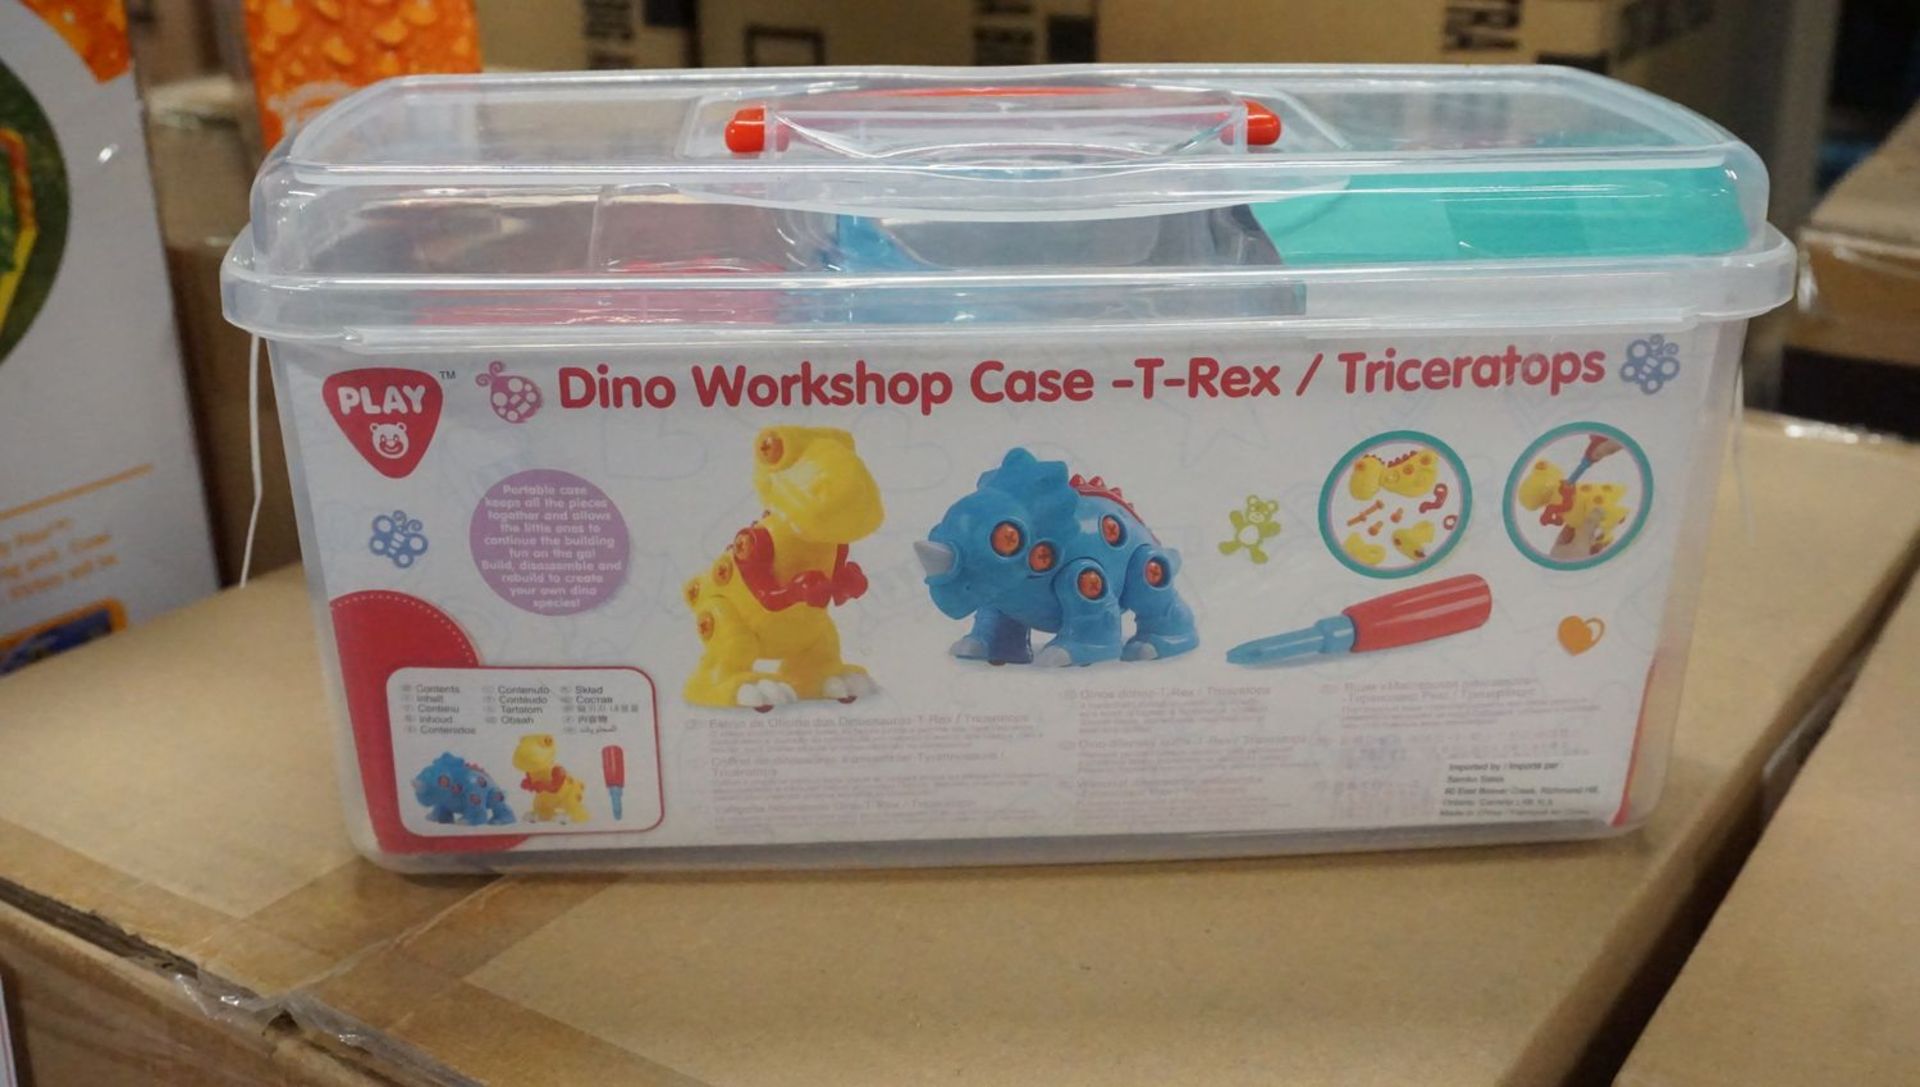 UNITS - PLAY DINO WORKSHOP CASE - T-REX / TRICERATOPS - Image 3 of 3